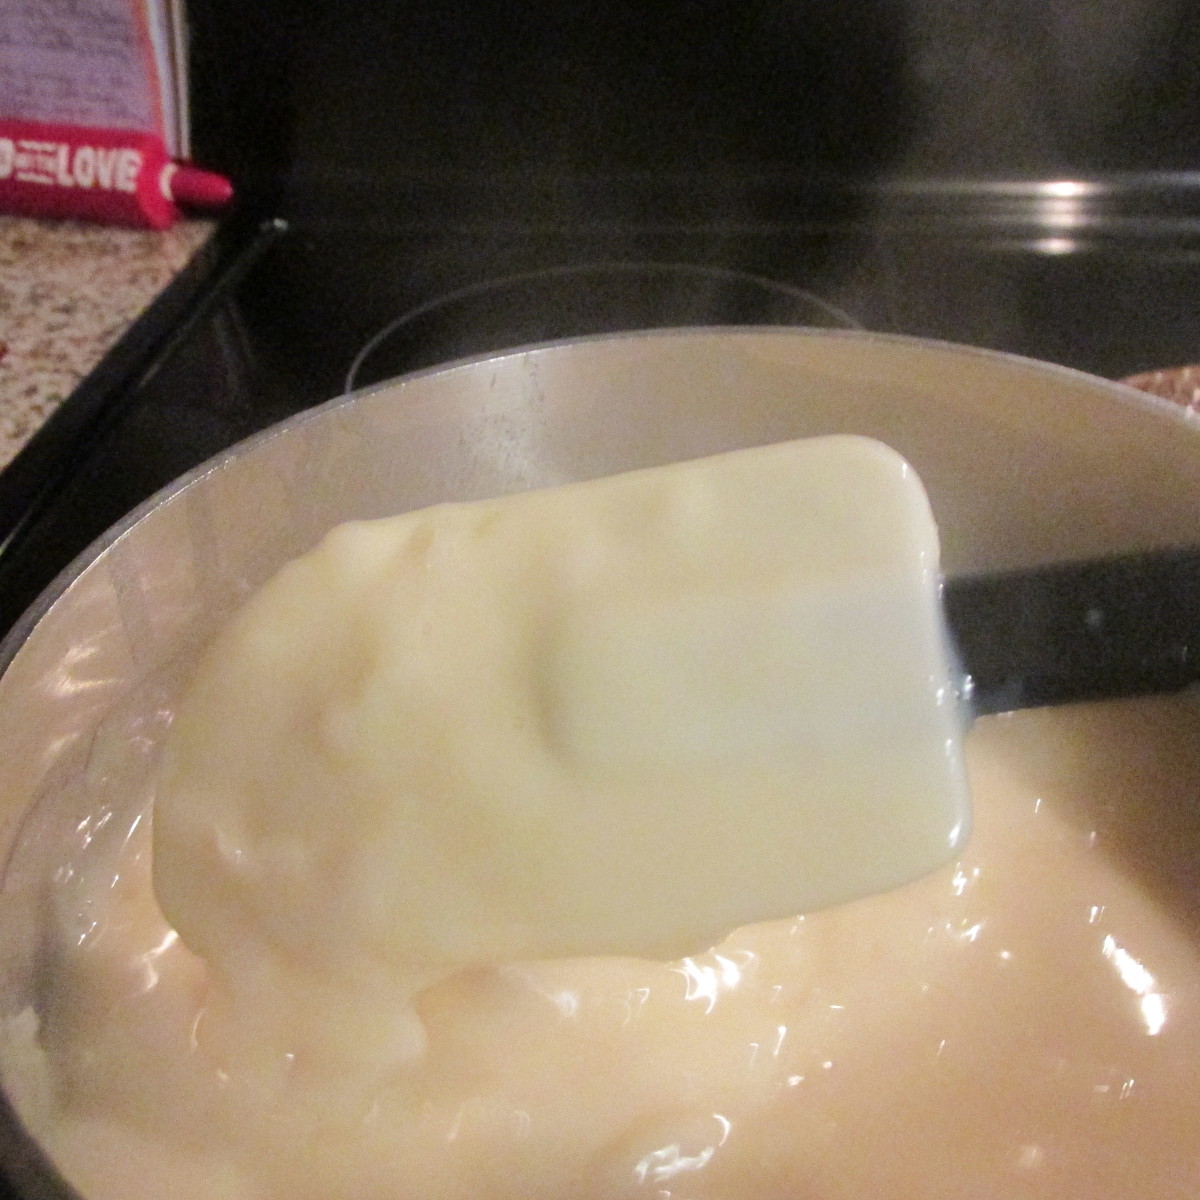 Showing the thickness of the coconut cream pie filling.